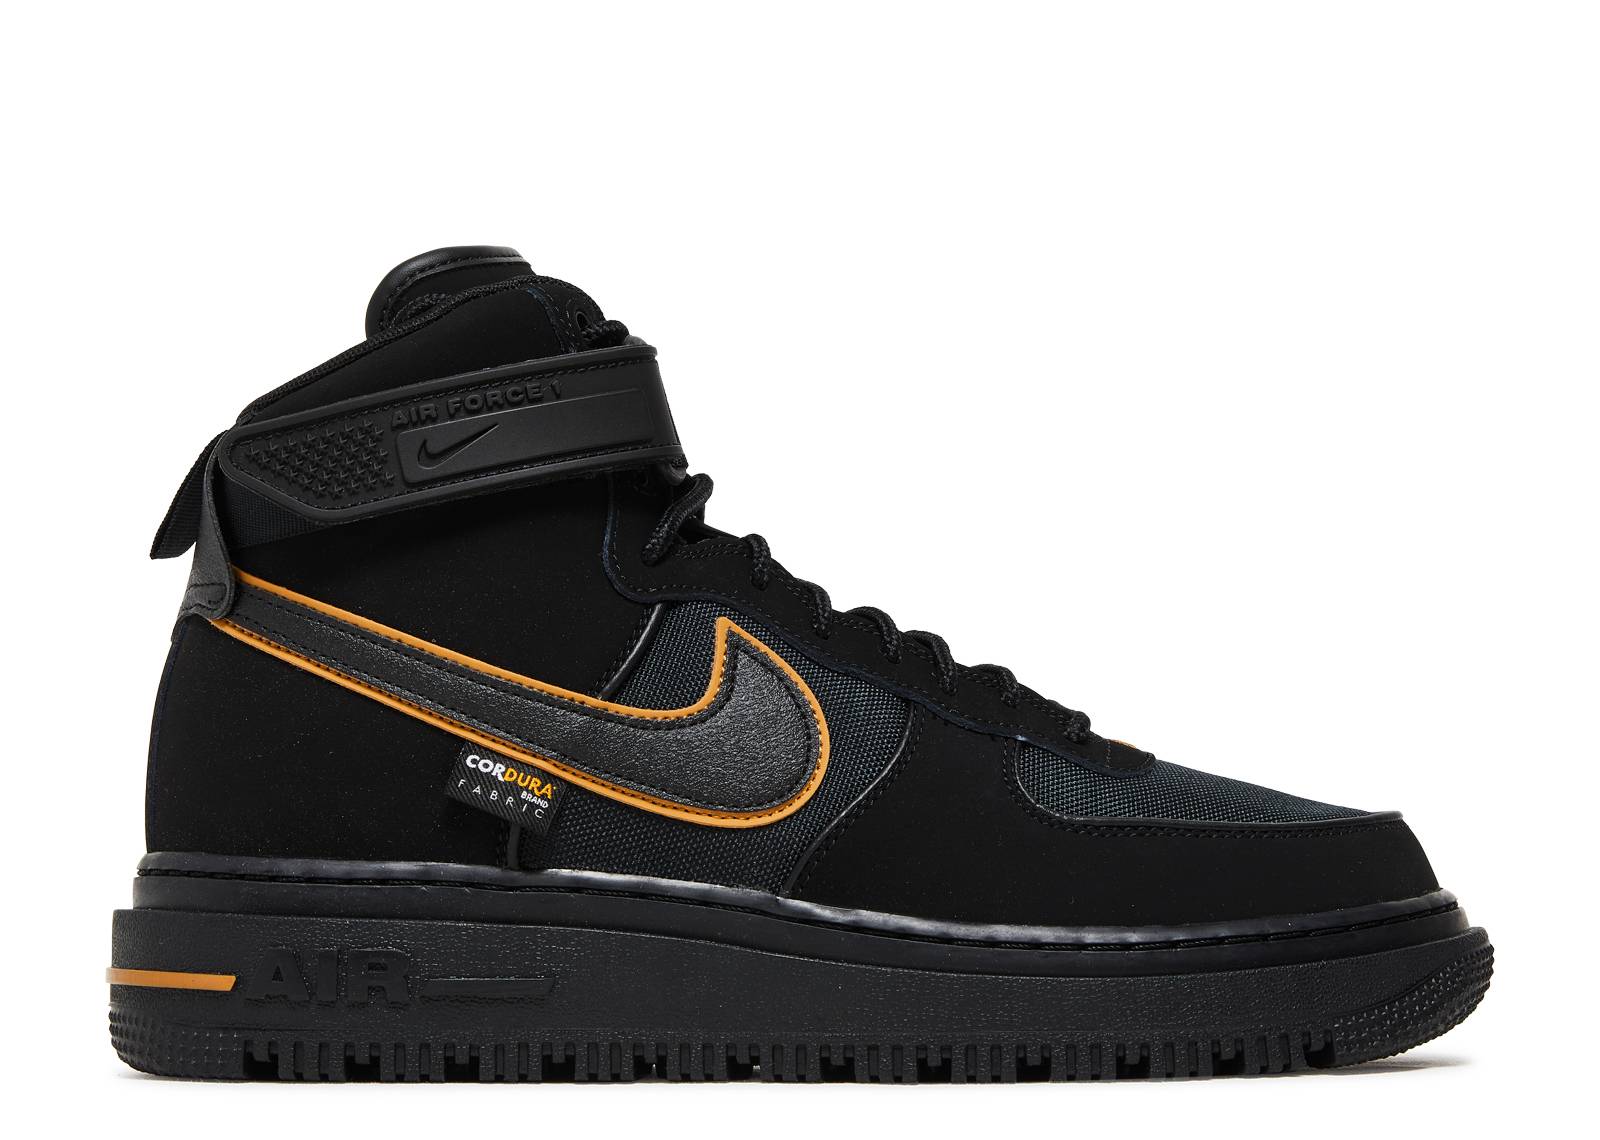 Air Force 1 Boot 'Black University Gold'